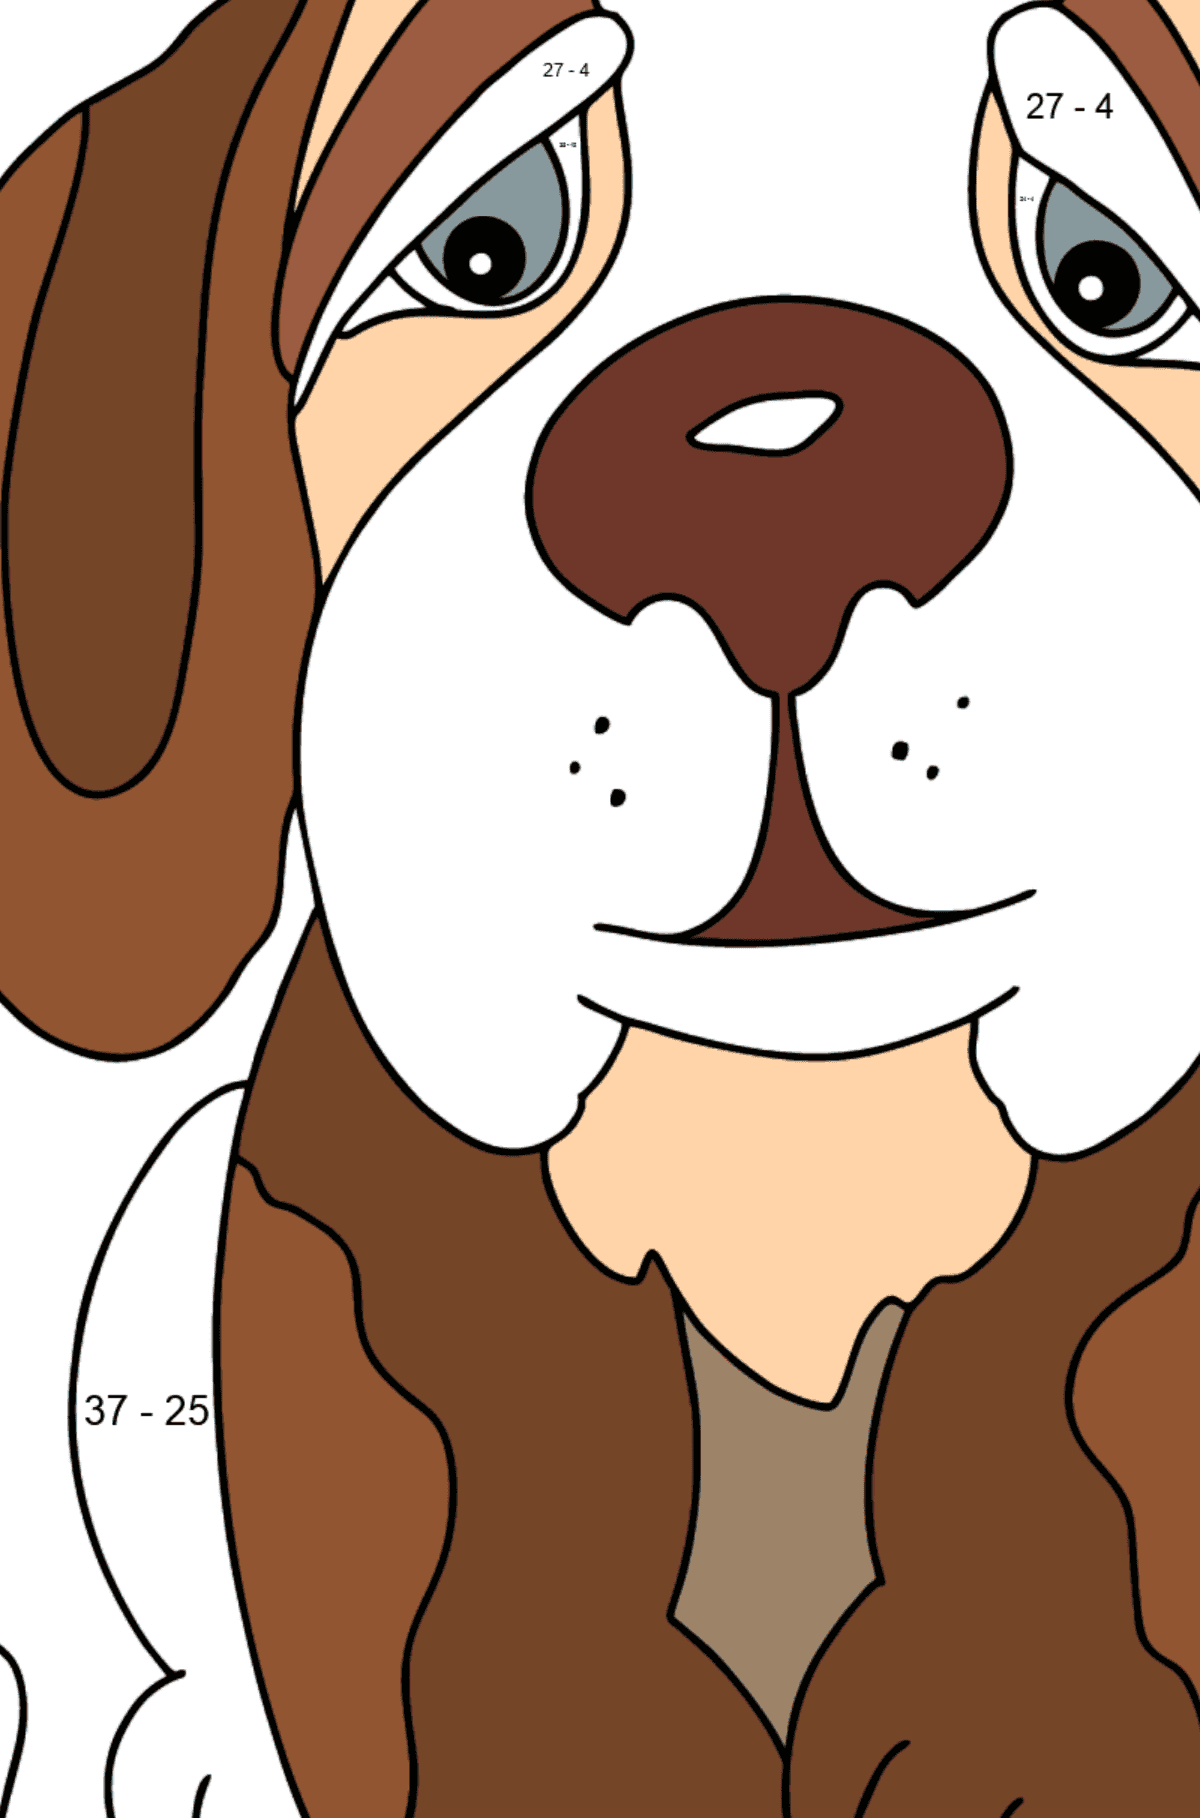 Coloring Page - A Dog is Watching a Butterfly - Math Coloring - Subtraction for Kids